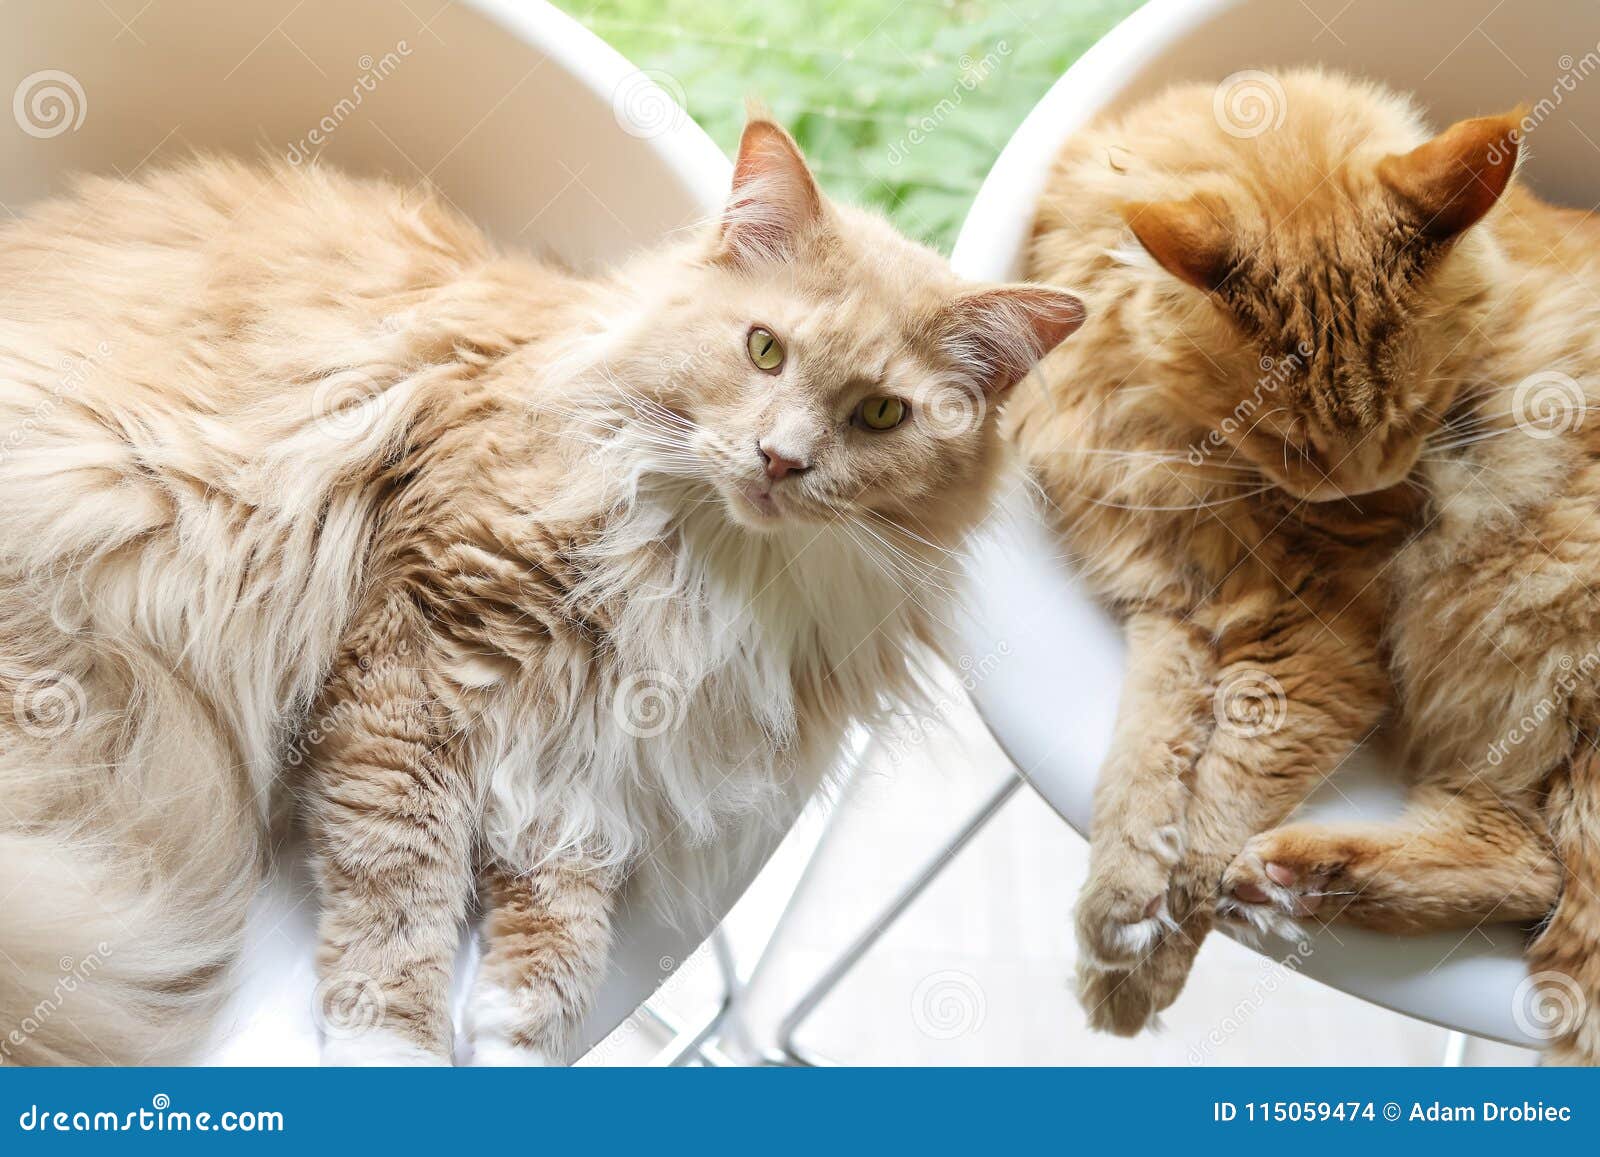 Pair of Maine Coon Cats on Tall Chairs Overhead Stock Photo - Image of ...